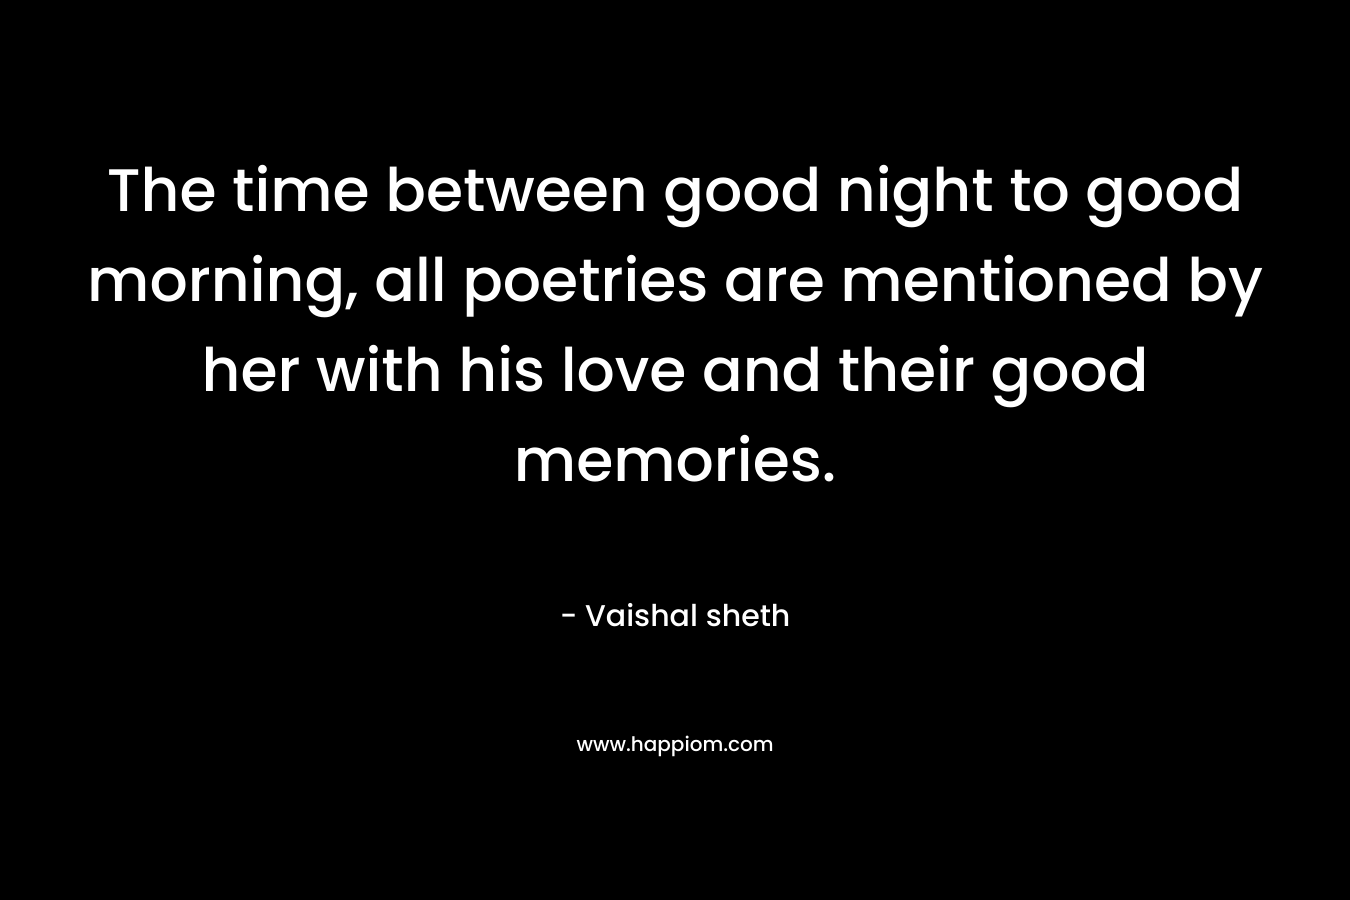 The time between good night to good morning, all poetries are mentioned by her with his love and their good memories. – Vaishal sheth